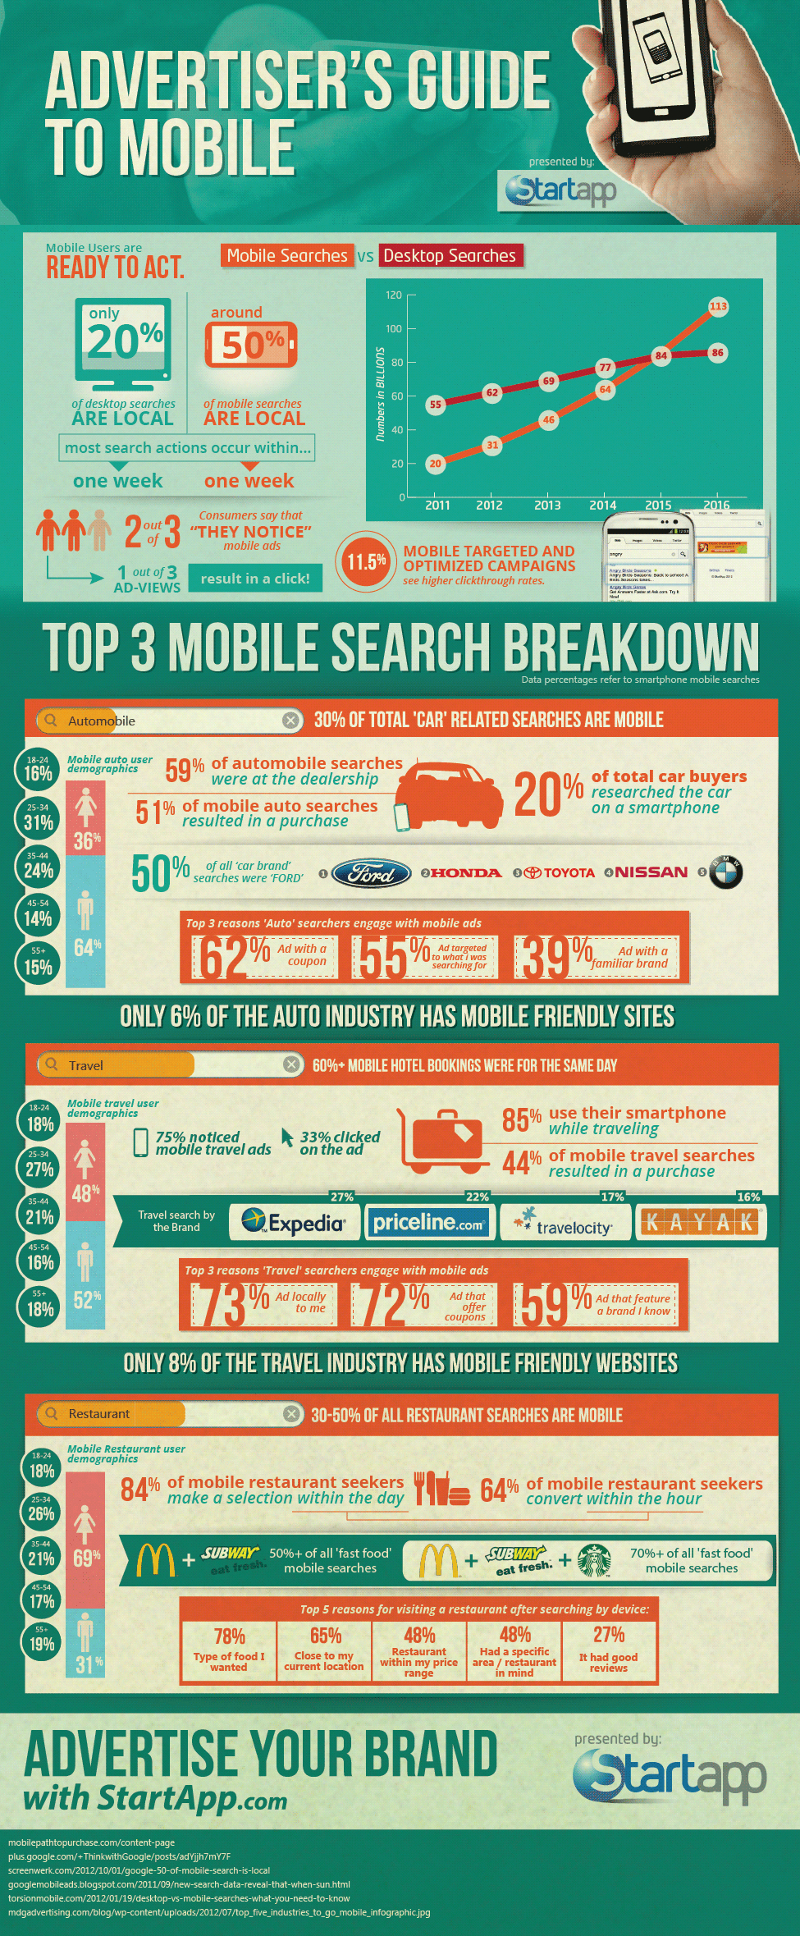 Mobile Advertising Trends